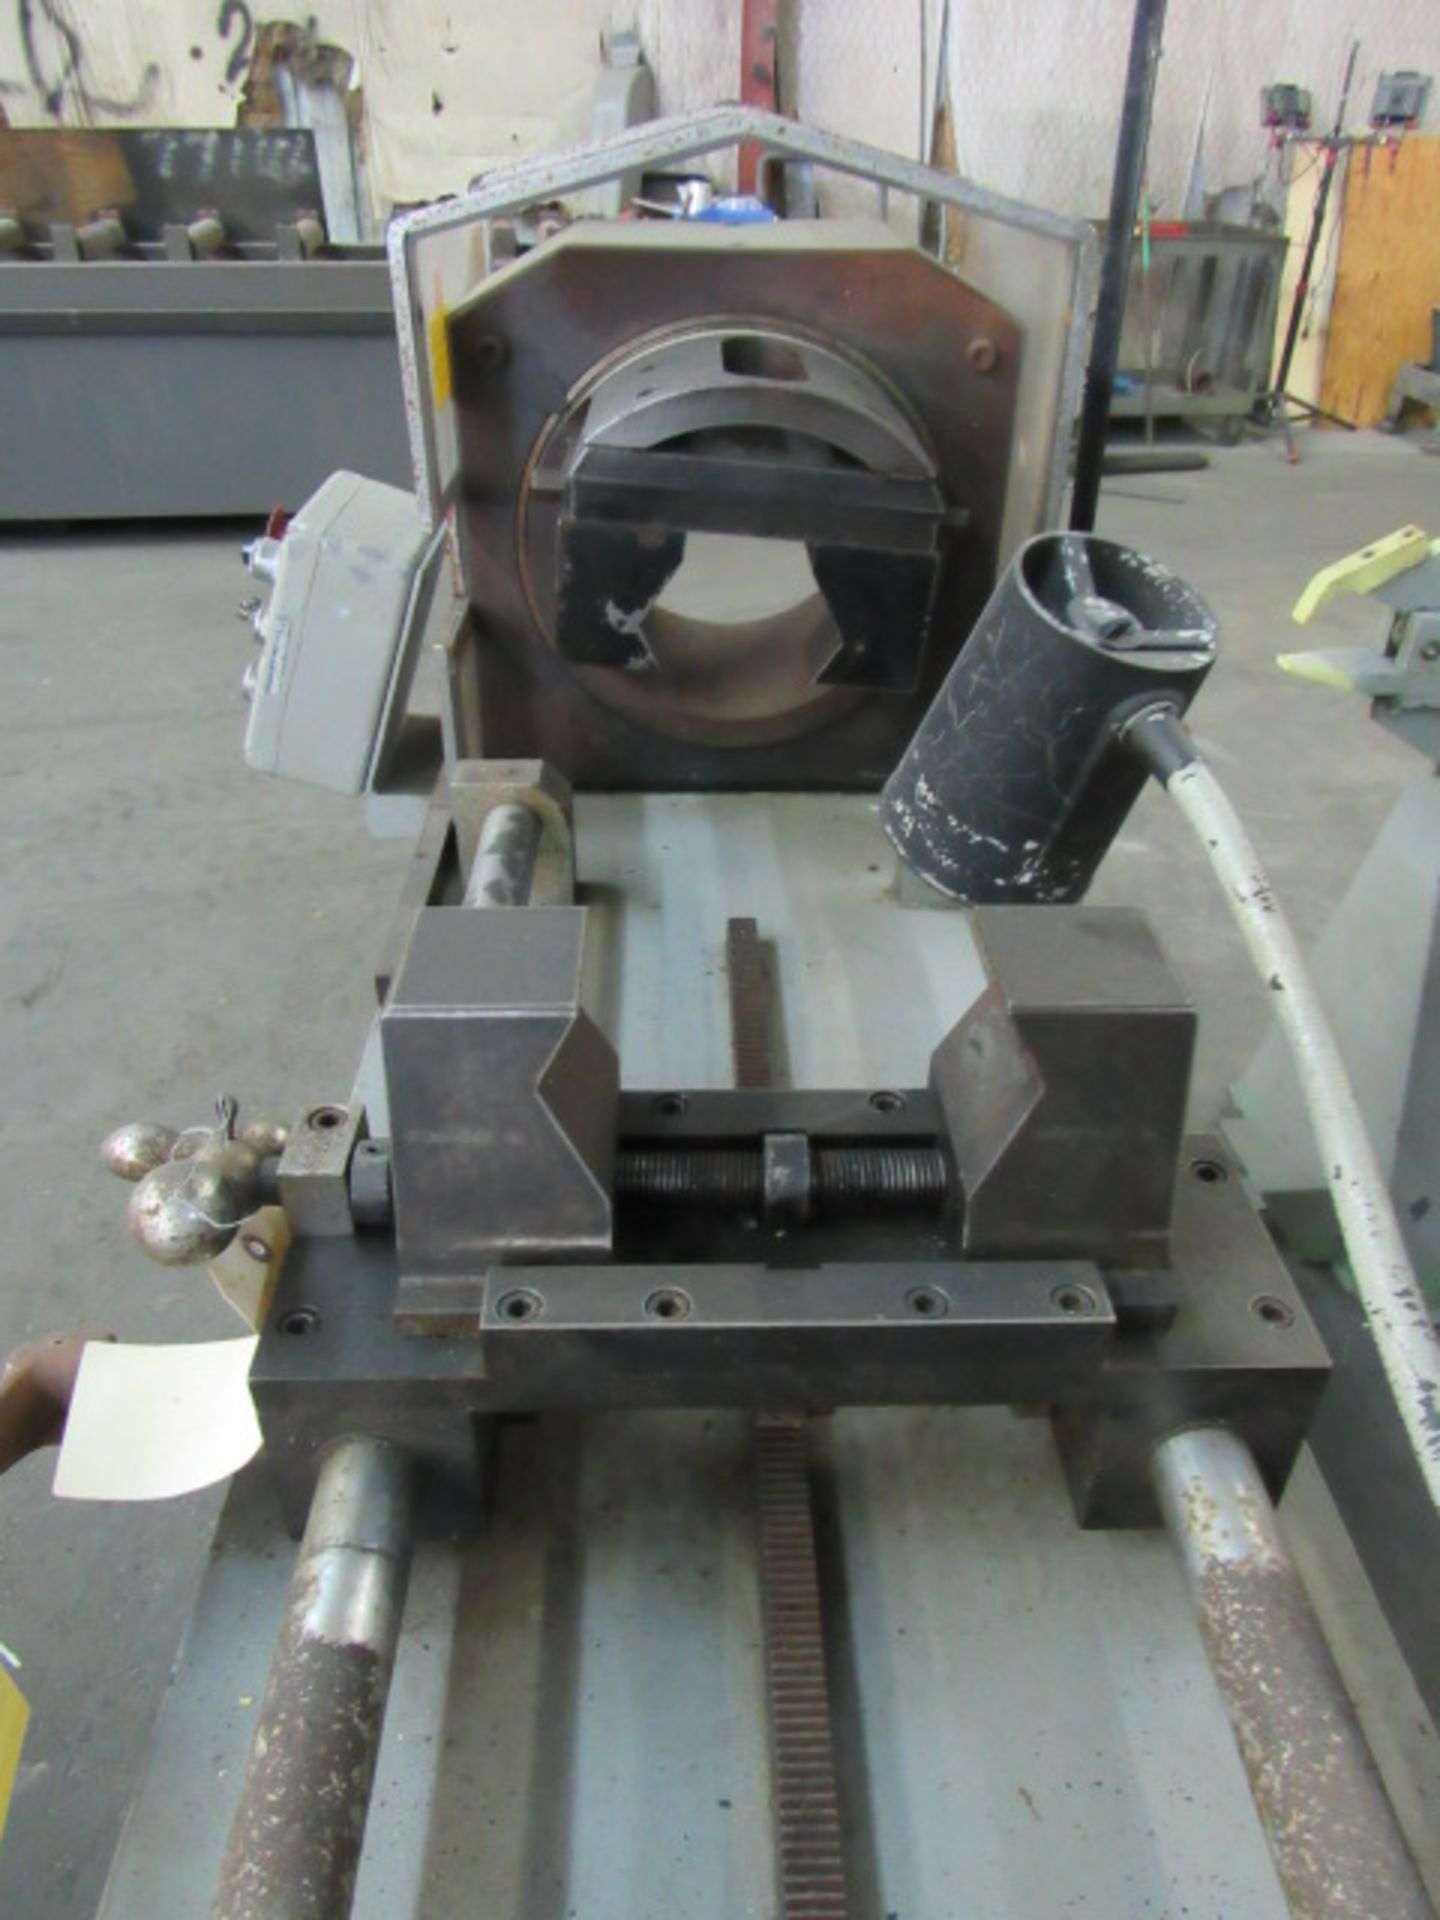 DOG-LEG HOSE ASSEMBLY MACHINE, AEROQUIP MDL. A, new 1985, 4” to 48” cap., large qty. of tooling & - Image 4 of 8